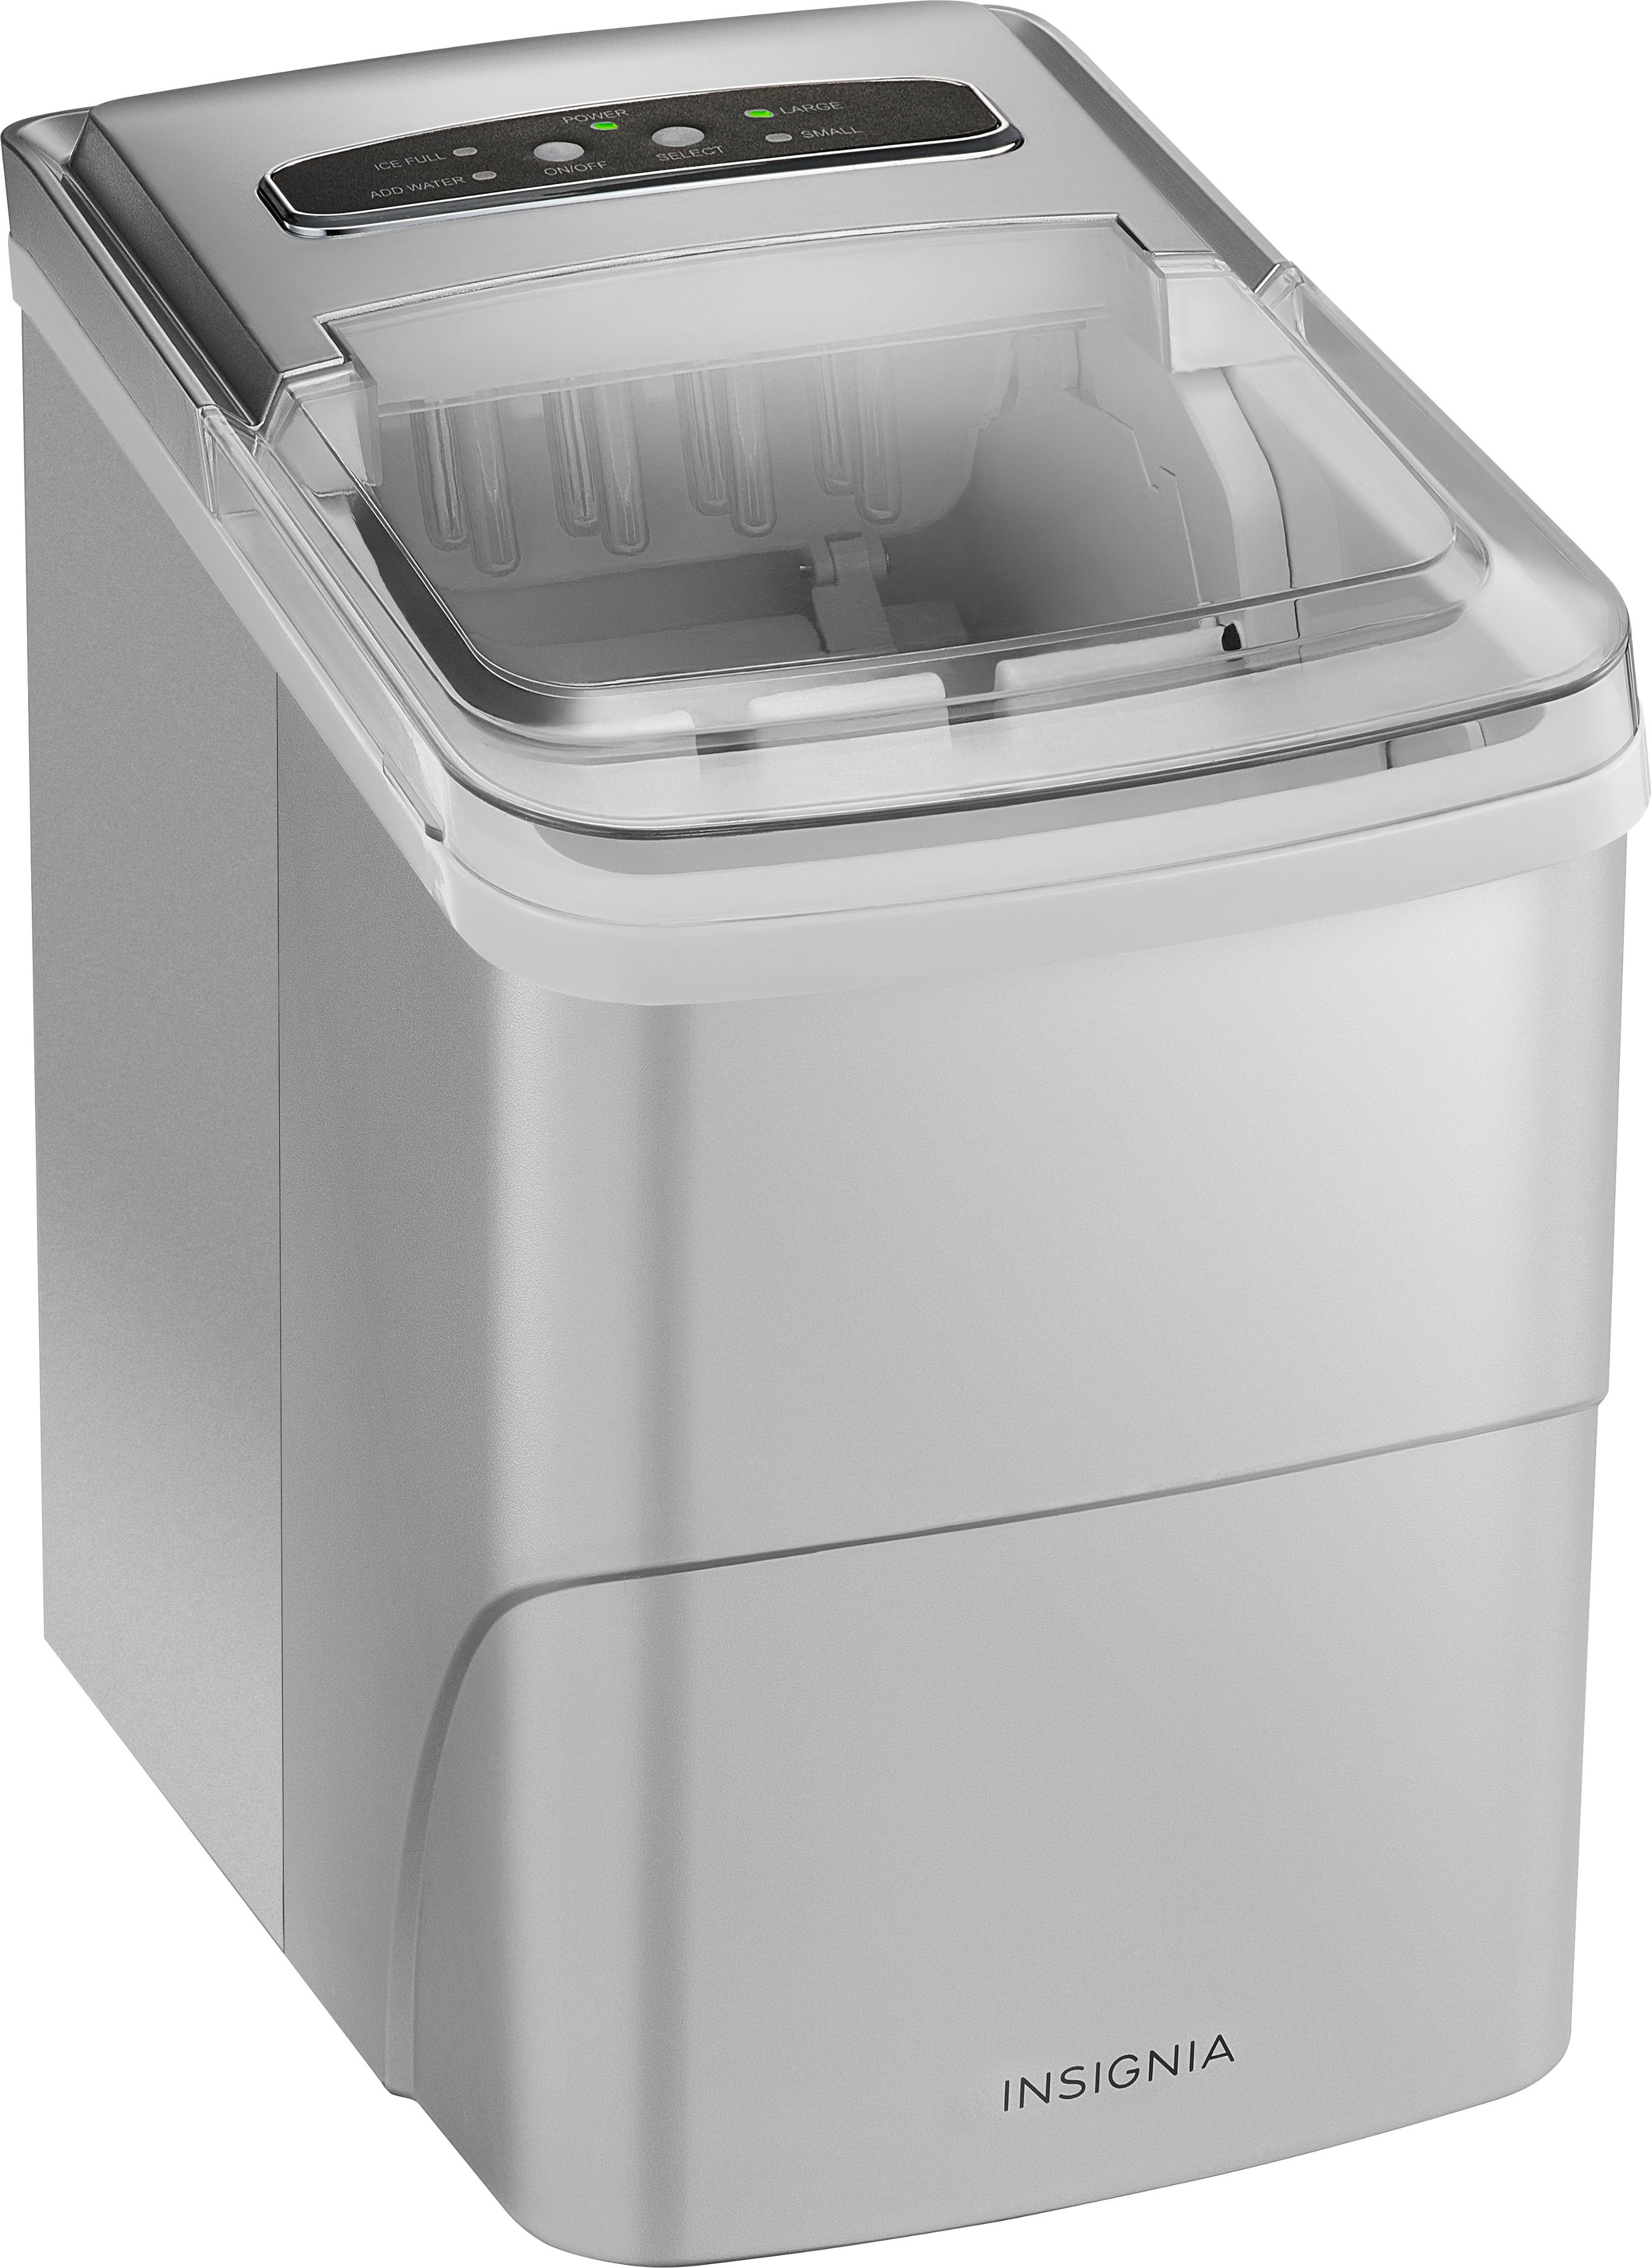 Angle View: Insignia™ - Portable Ice Maker with Auto Shut-Off - Silver